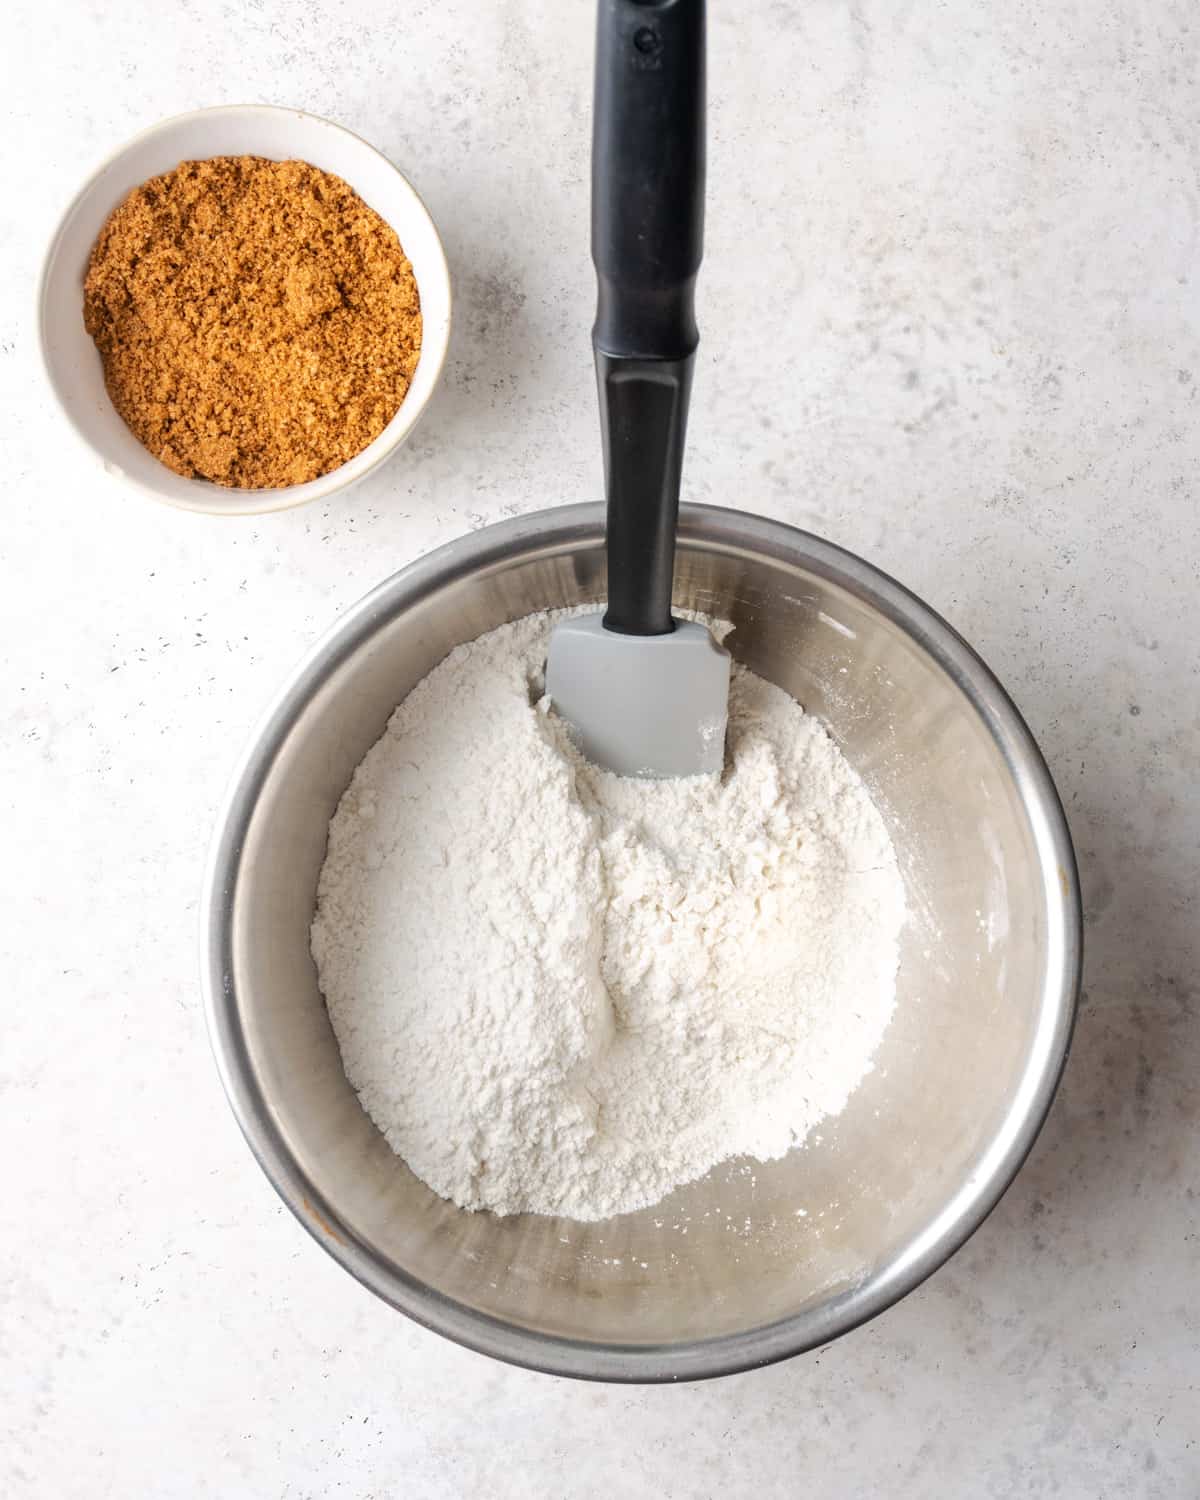 Gluten free flour, baking powder, sugar and salt combined together in a large metal mixing bowl.